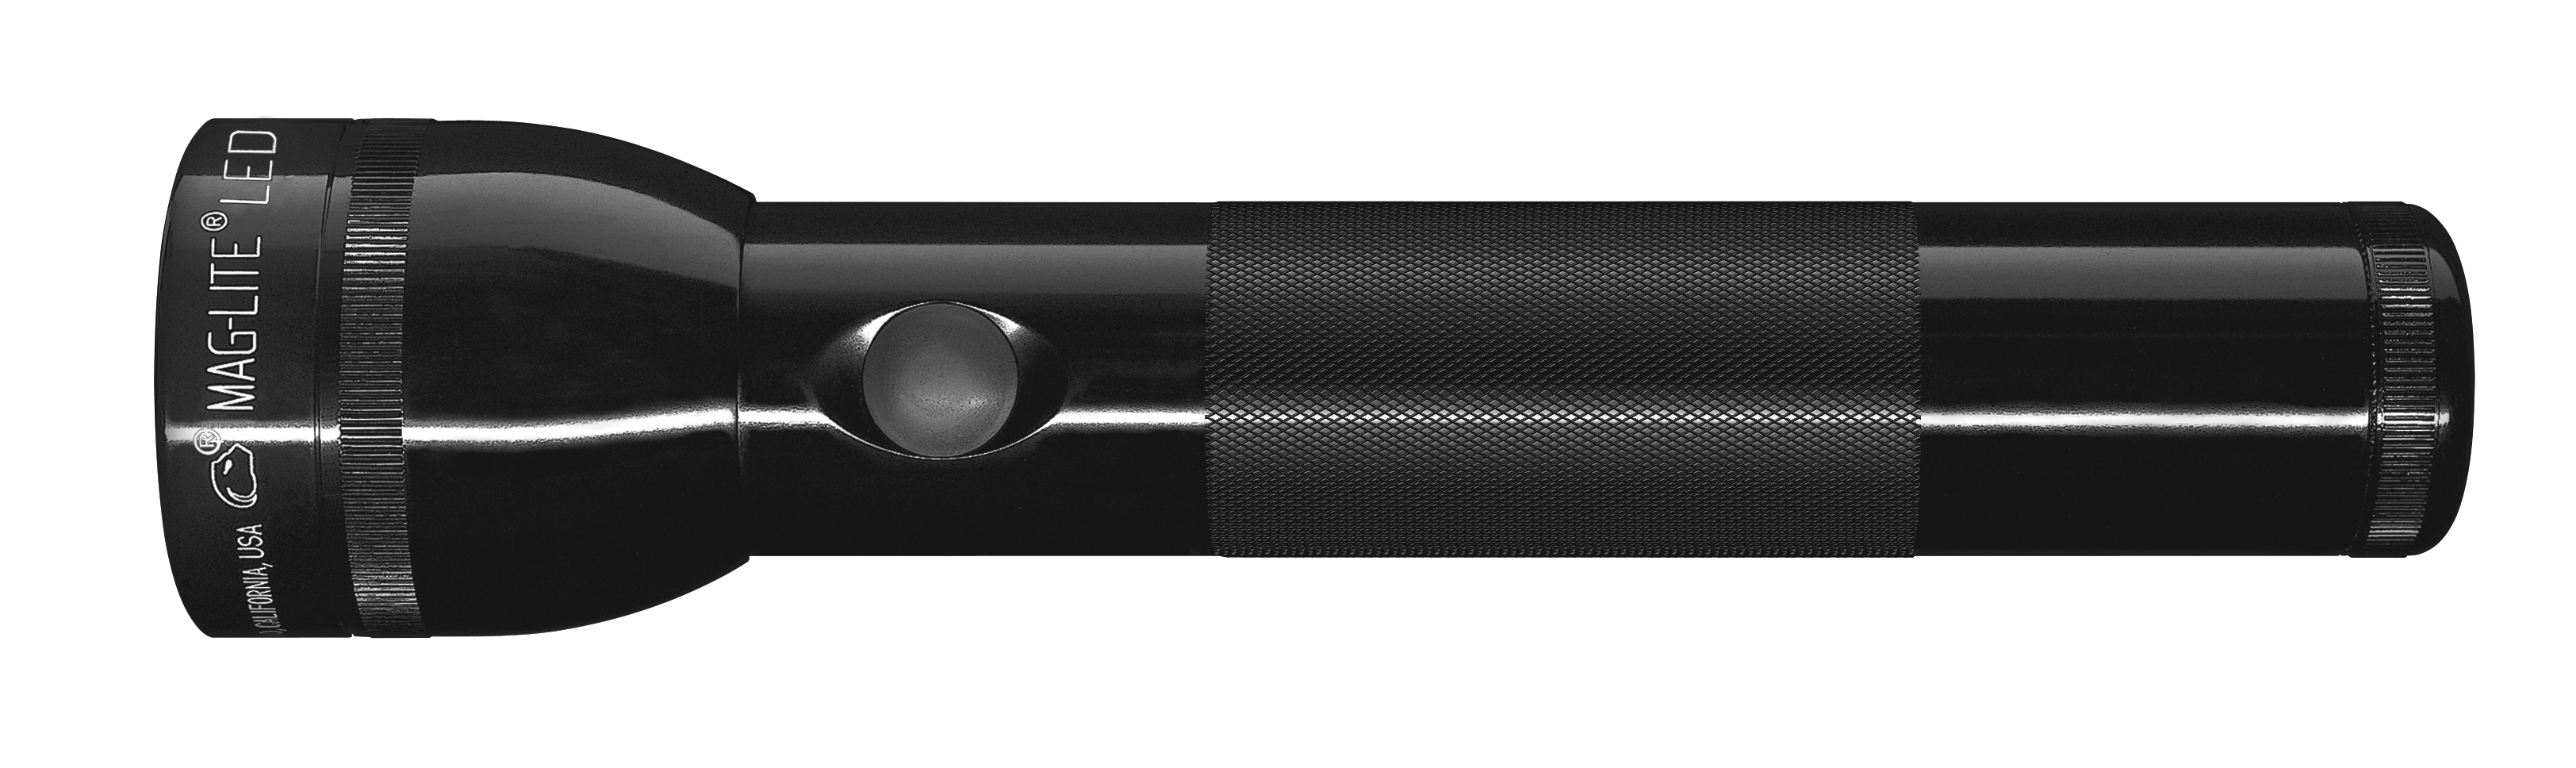 Promotional Maglite 2D Cell Torch